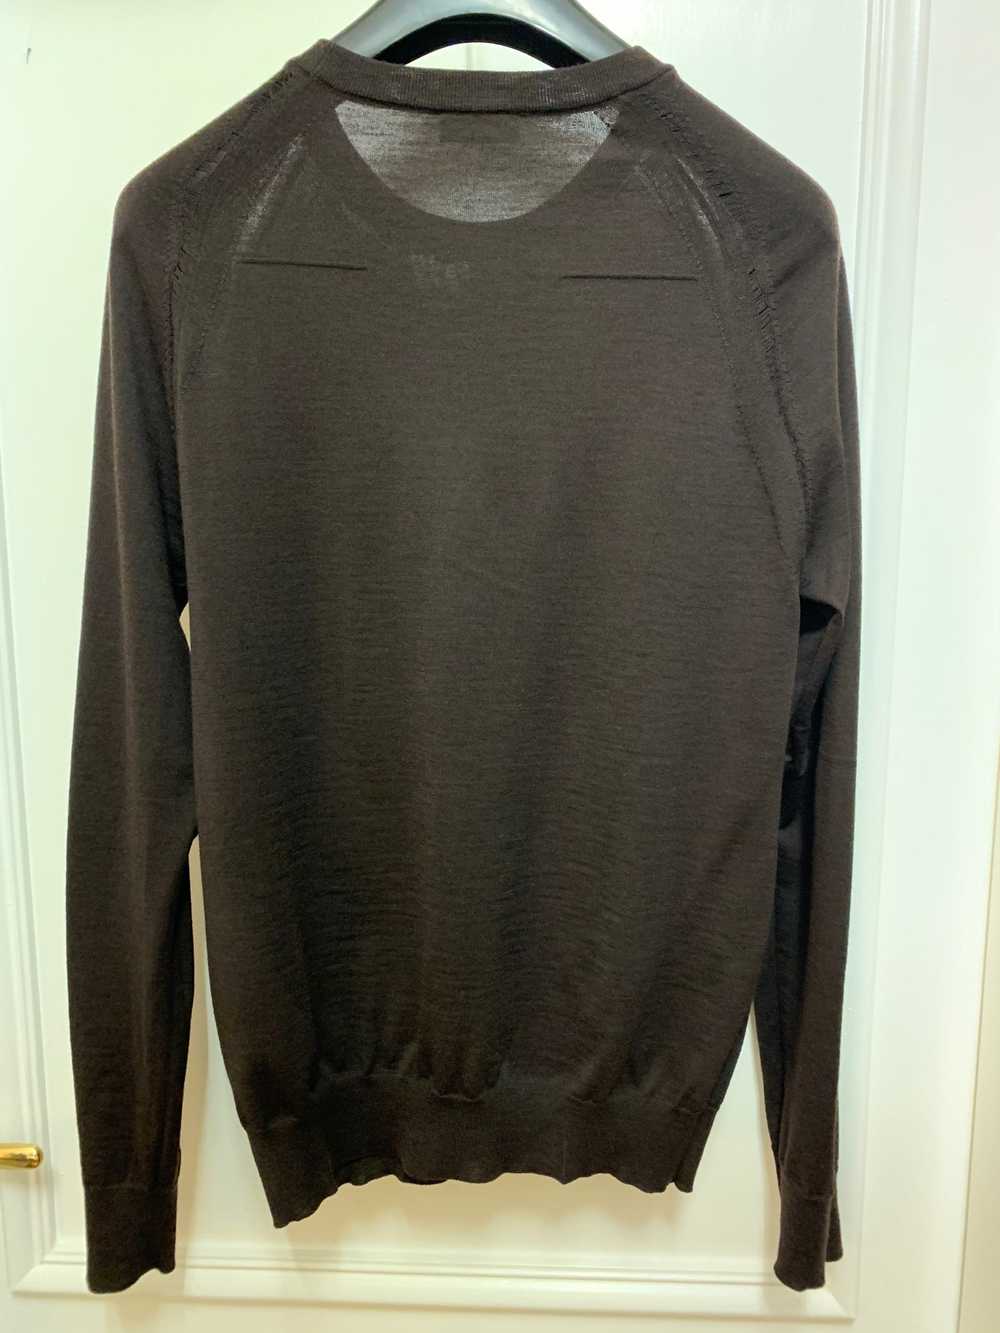 Dior Dior Homme Hedi Slimane Sweater in size -S- - image 2